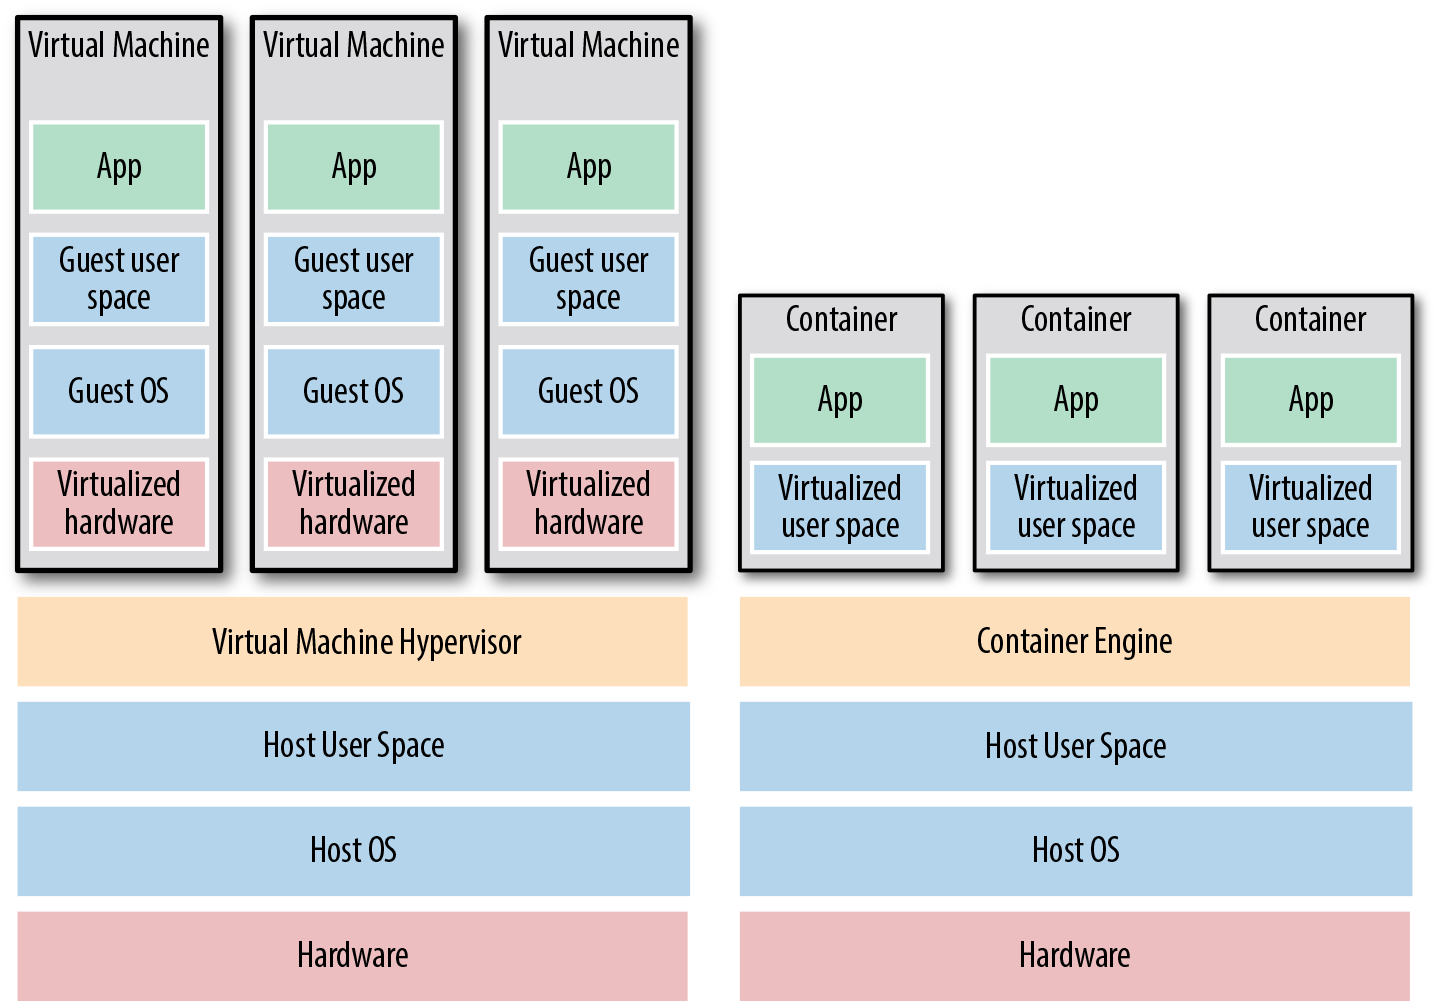 The two main types of images: VMs, on the left, and containers, on the right. VMs virtualize the hardware, whereas containers only virtualize user space.